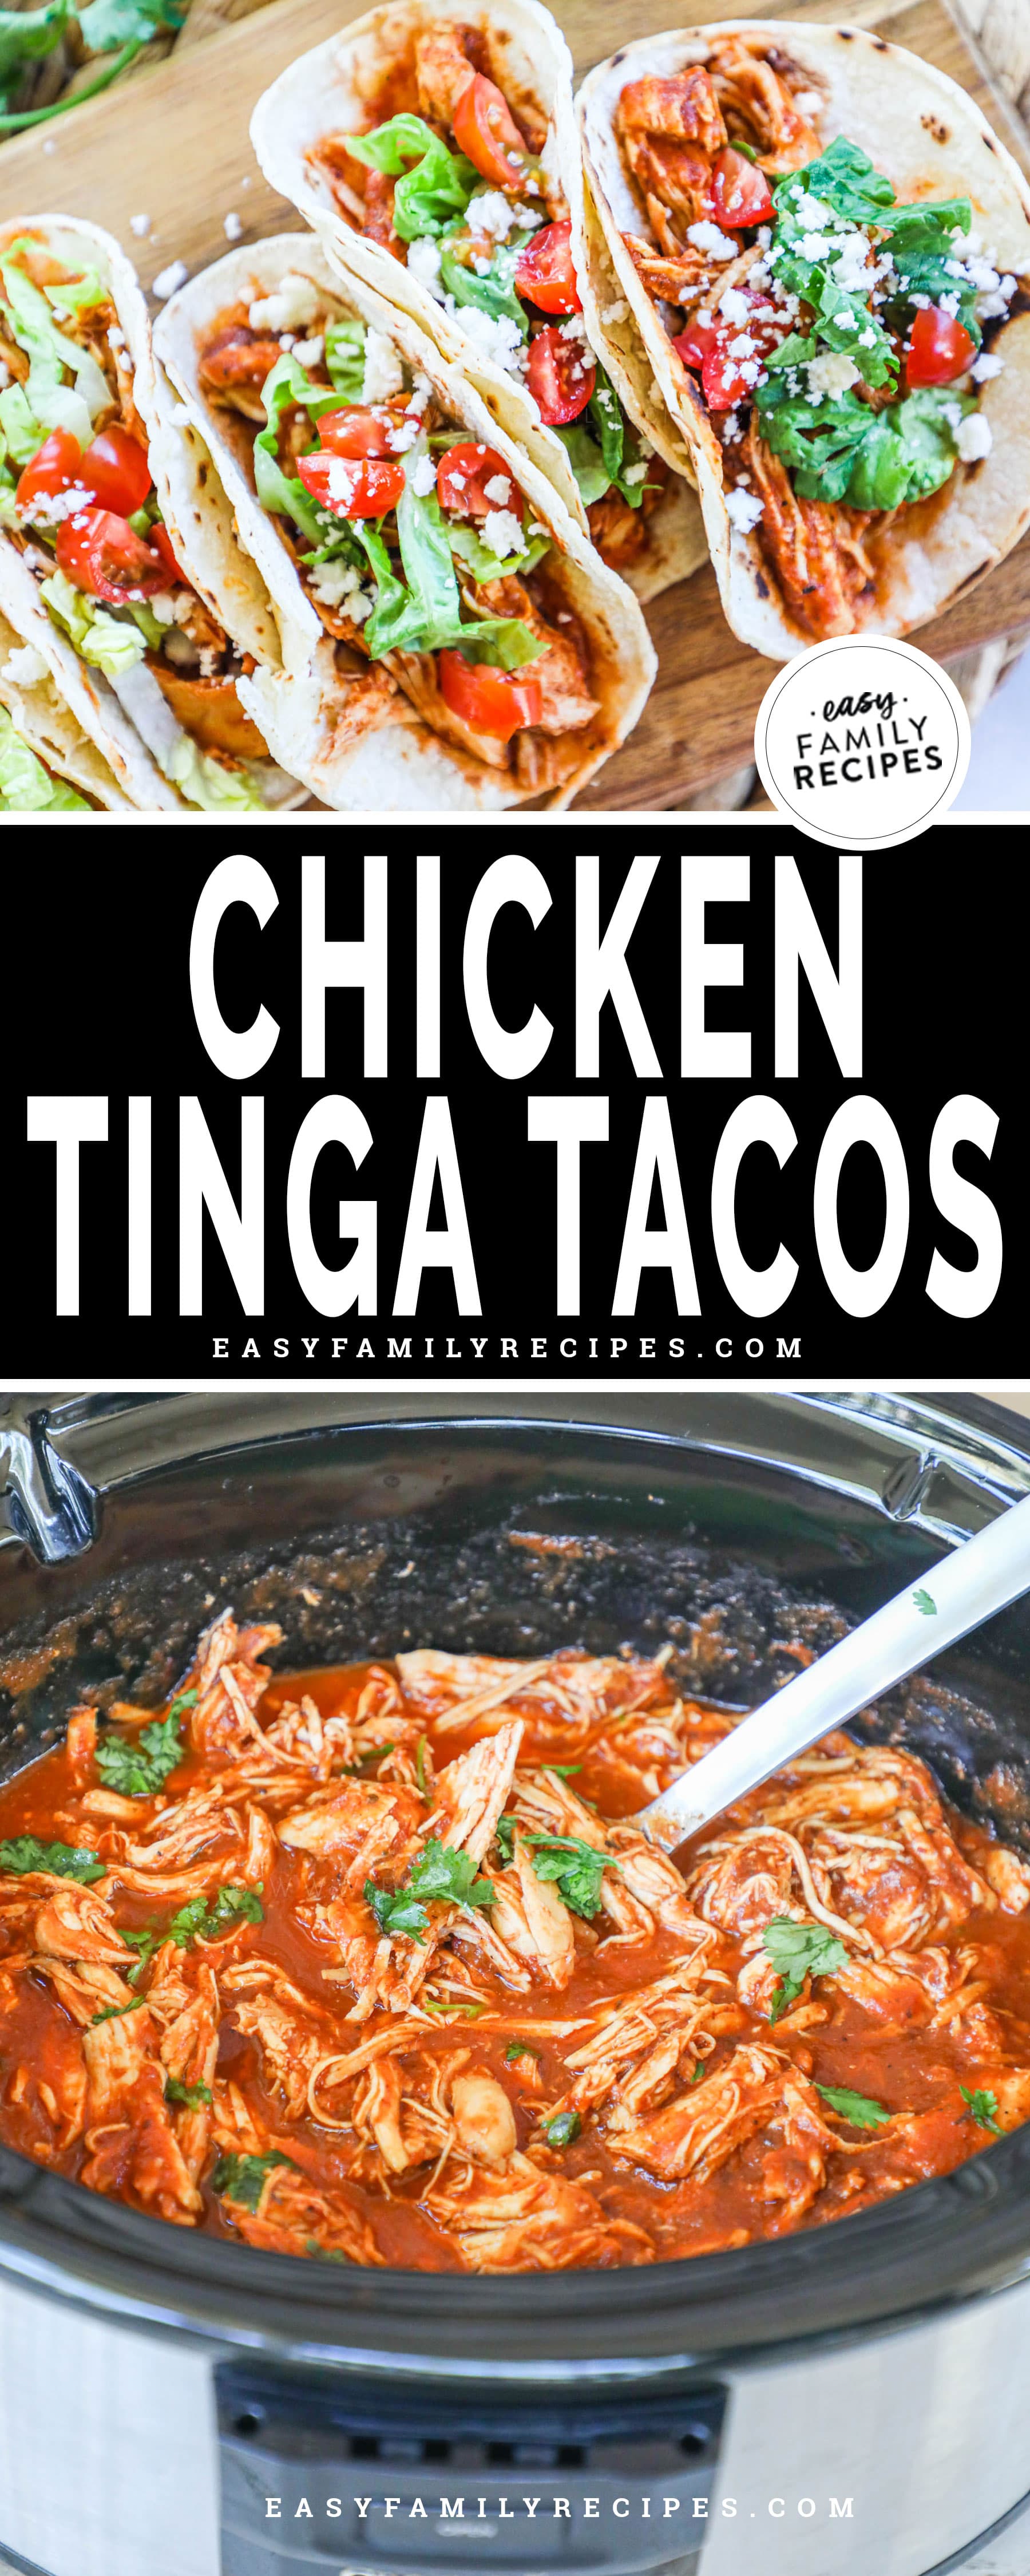 Chicken tinga tacos assembled on a cutting board with toppings and shredded chicken in a crockpot with a serving spoon.